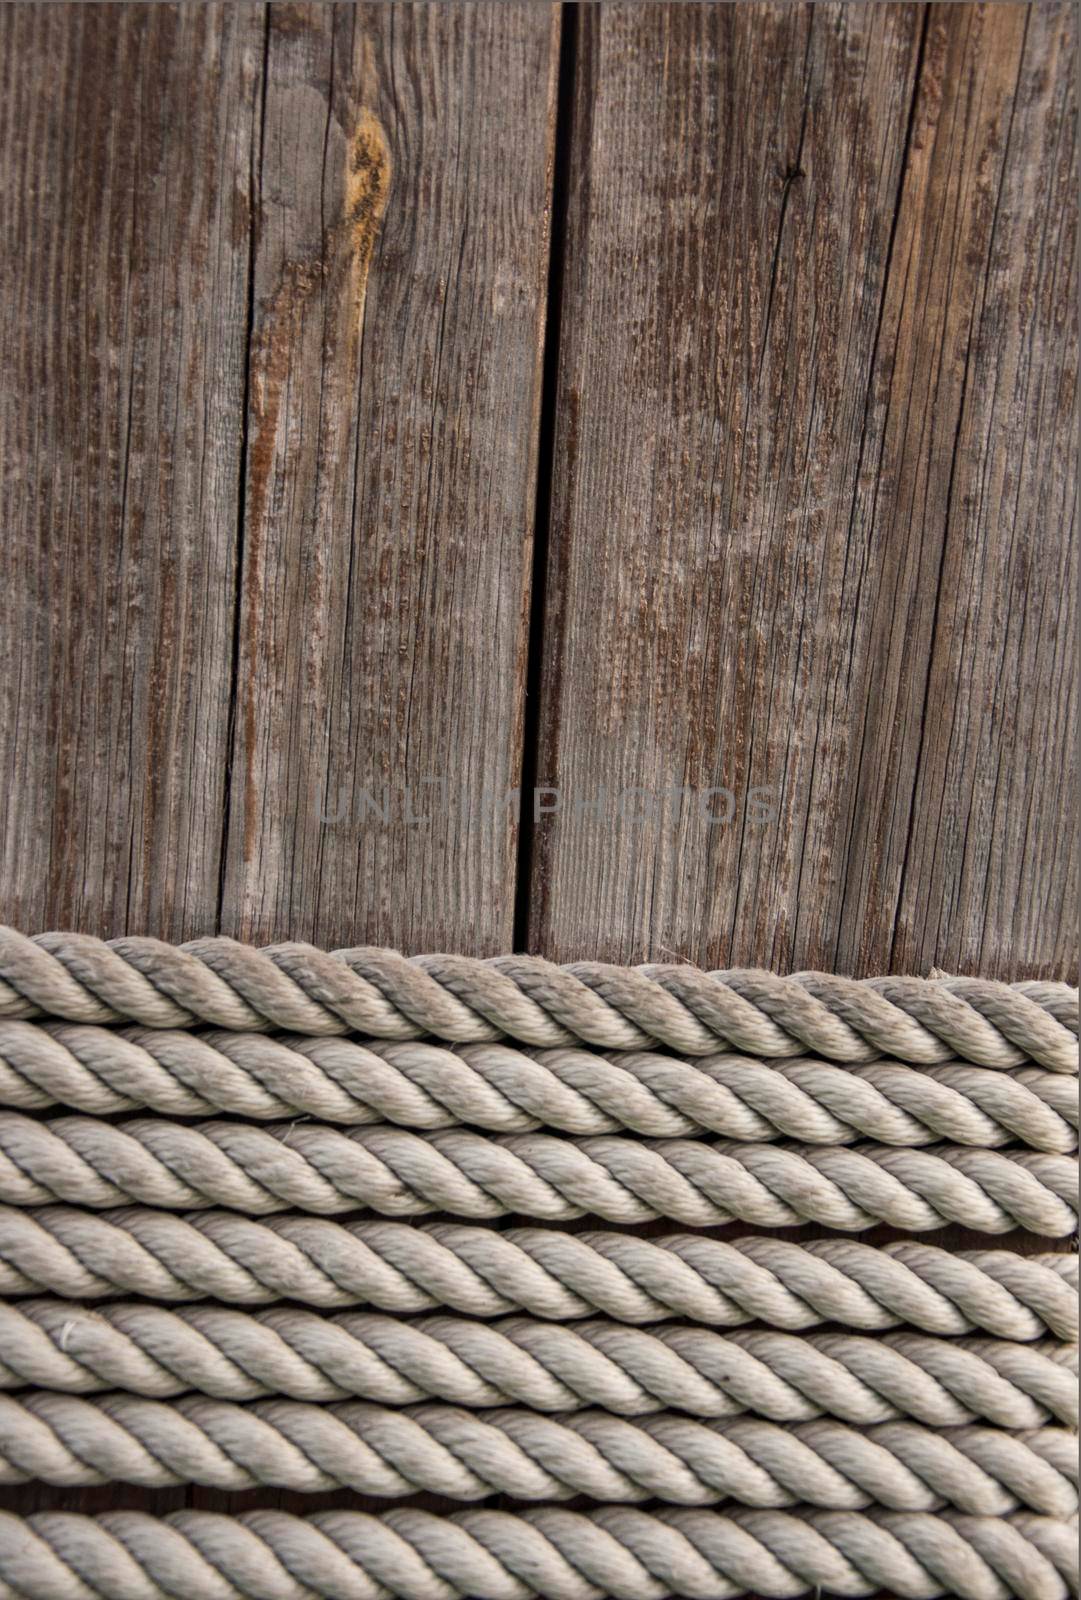 wood background with rope by inxti